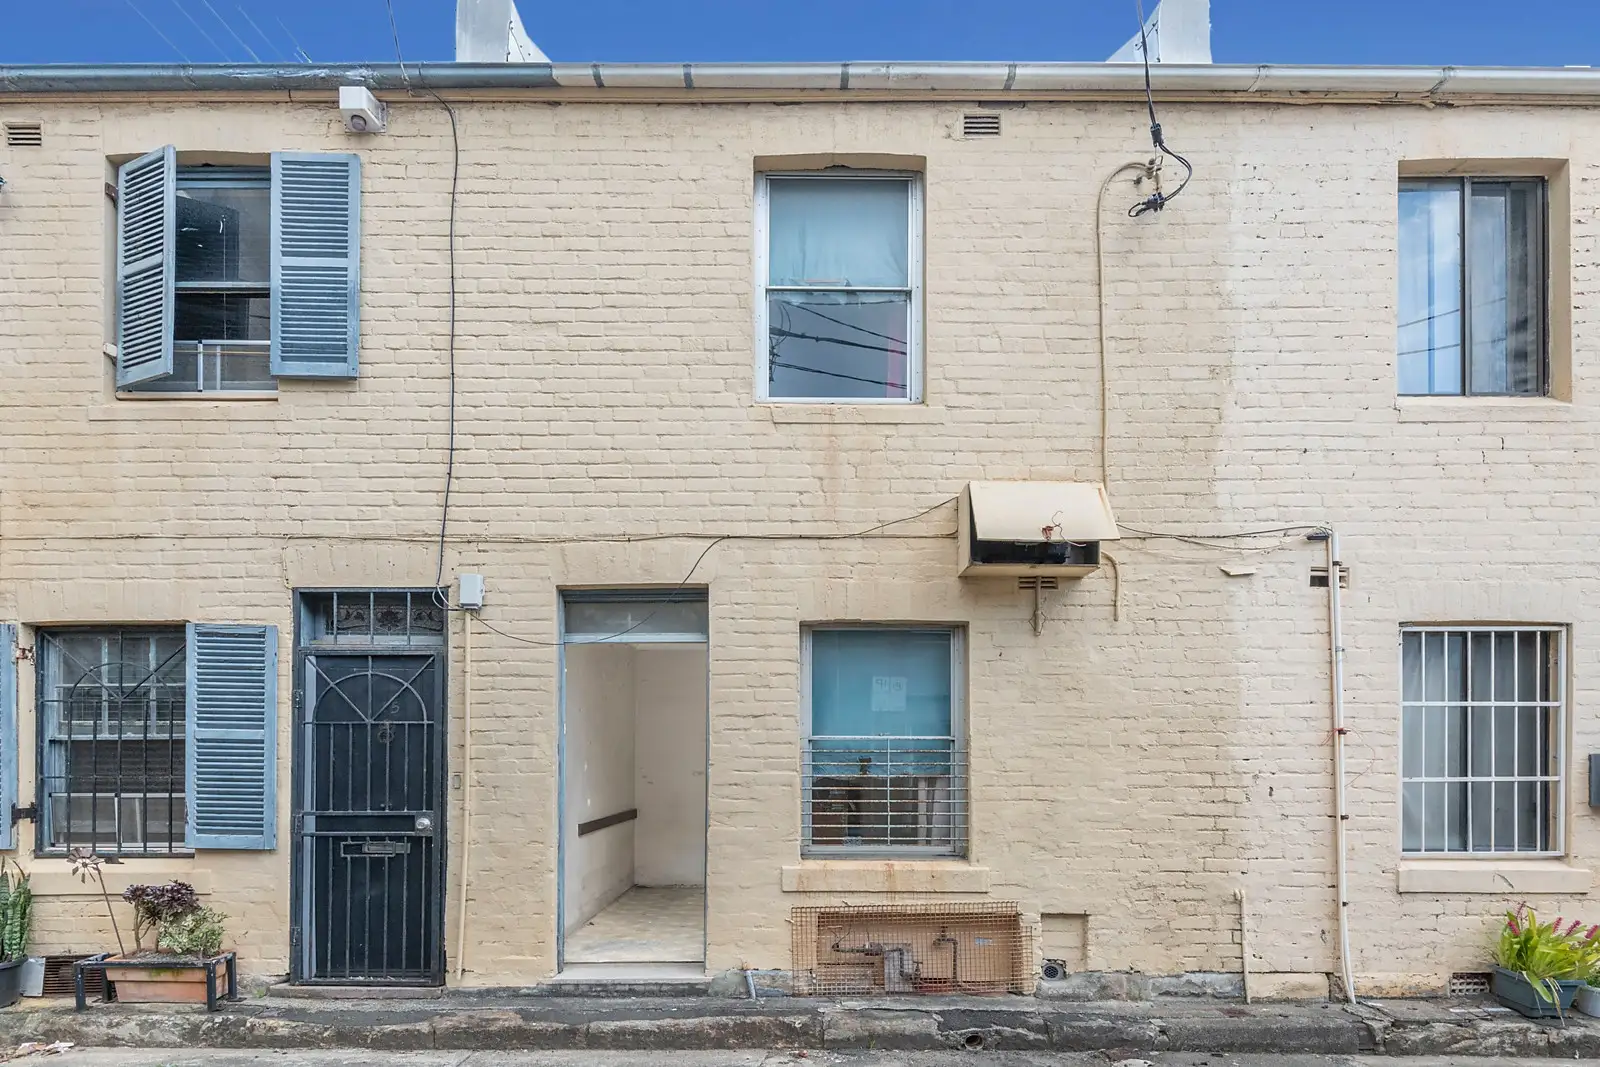 Photo #1: 13 Kirk Street, Ultimo - Sold by Sydney Sotheby's International Realty